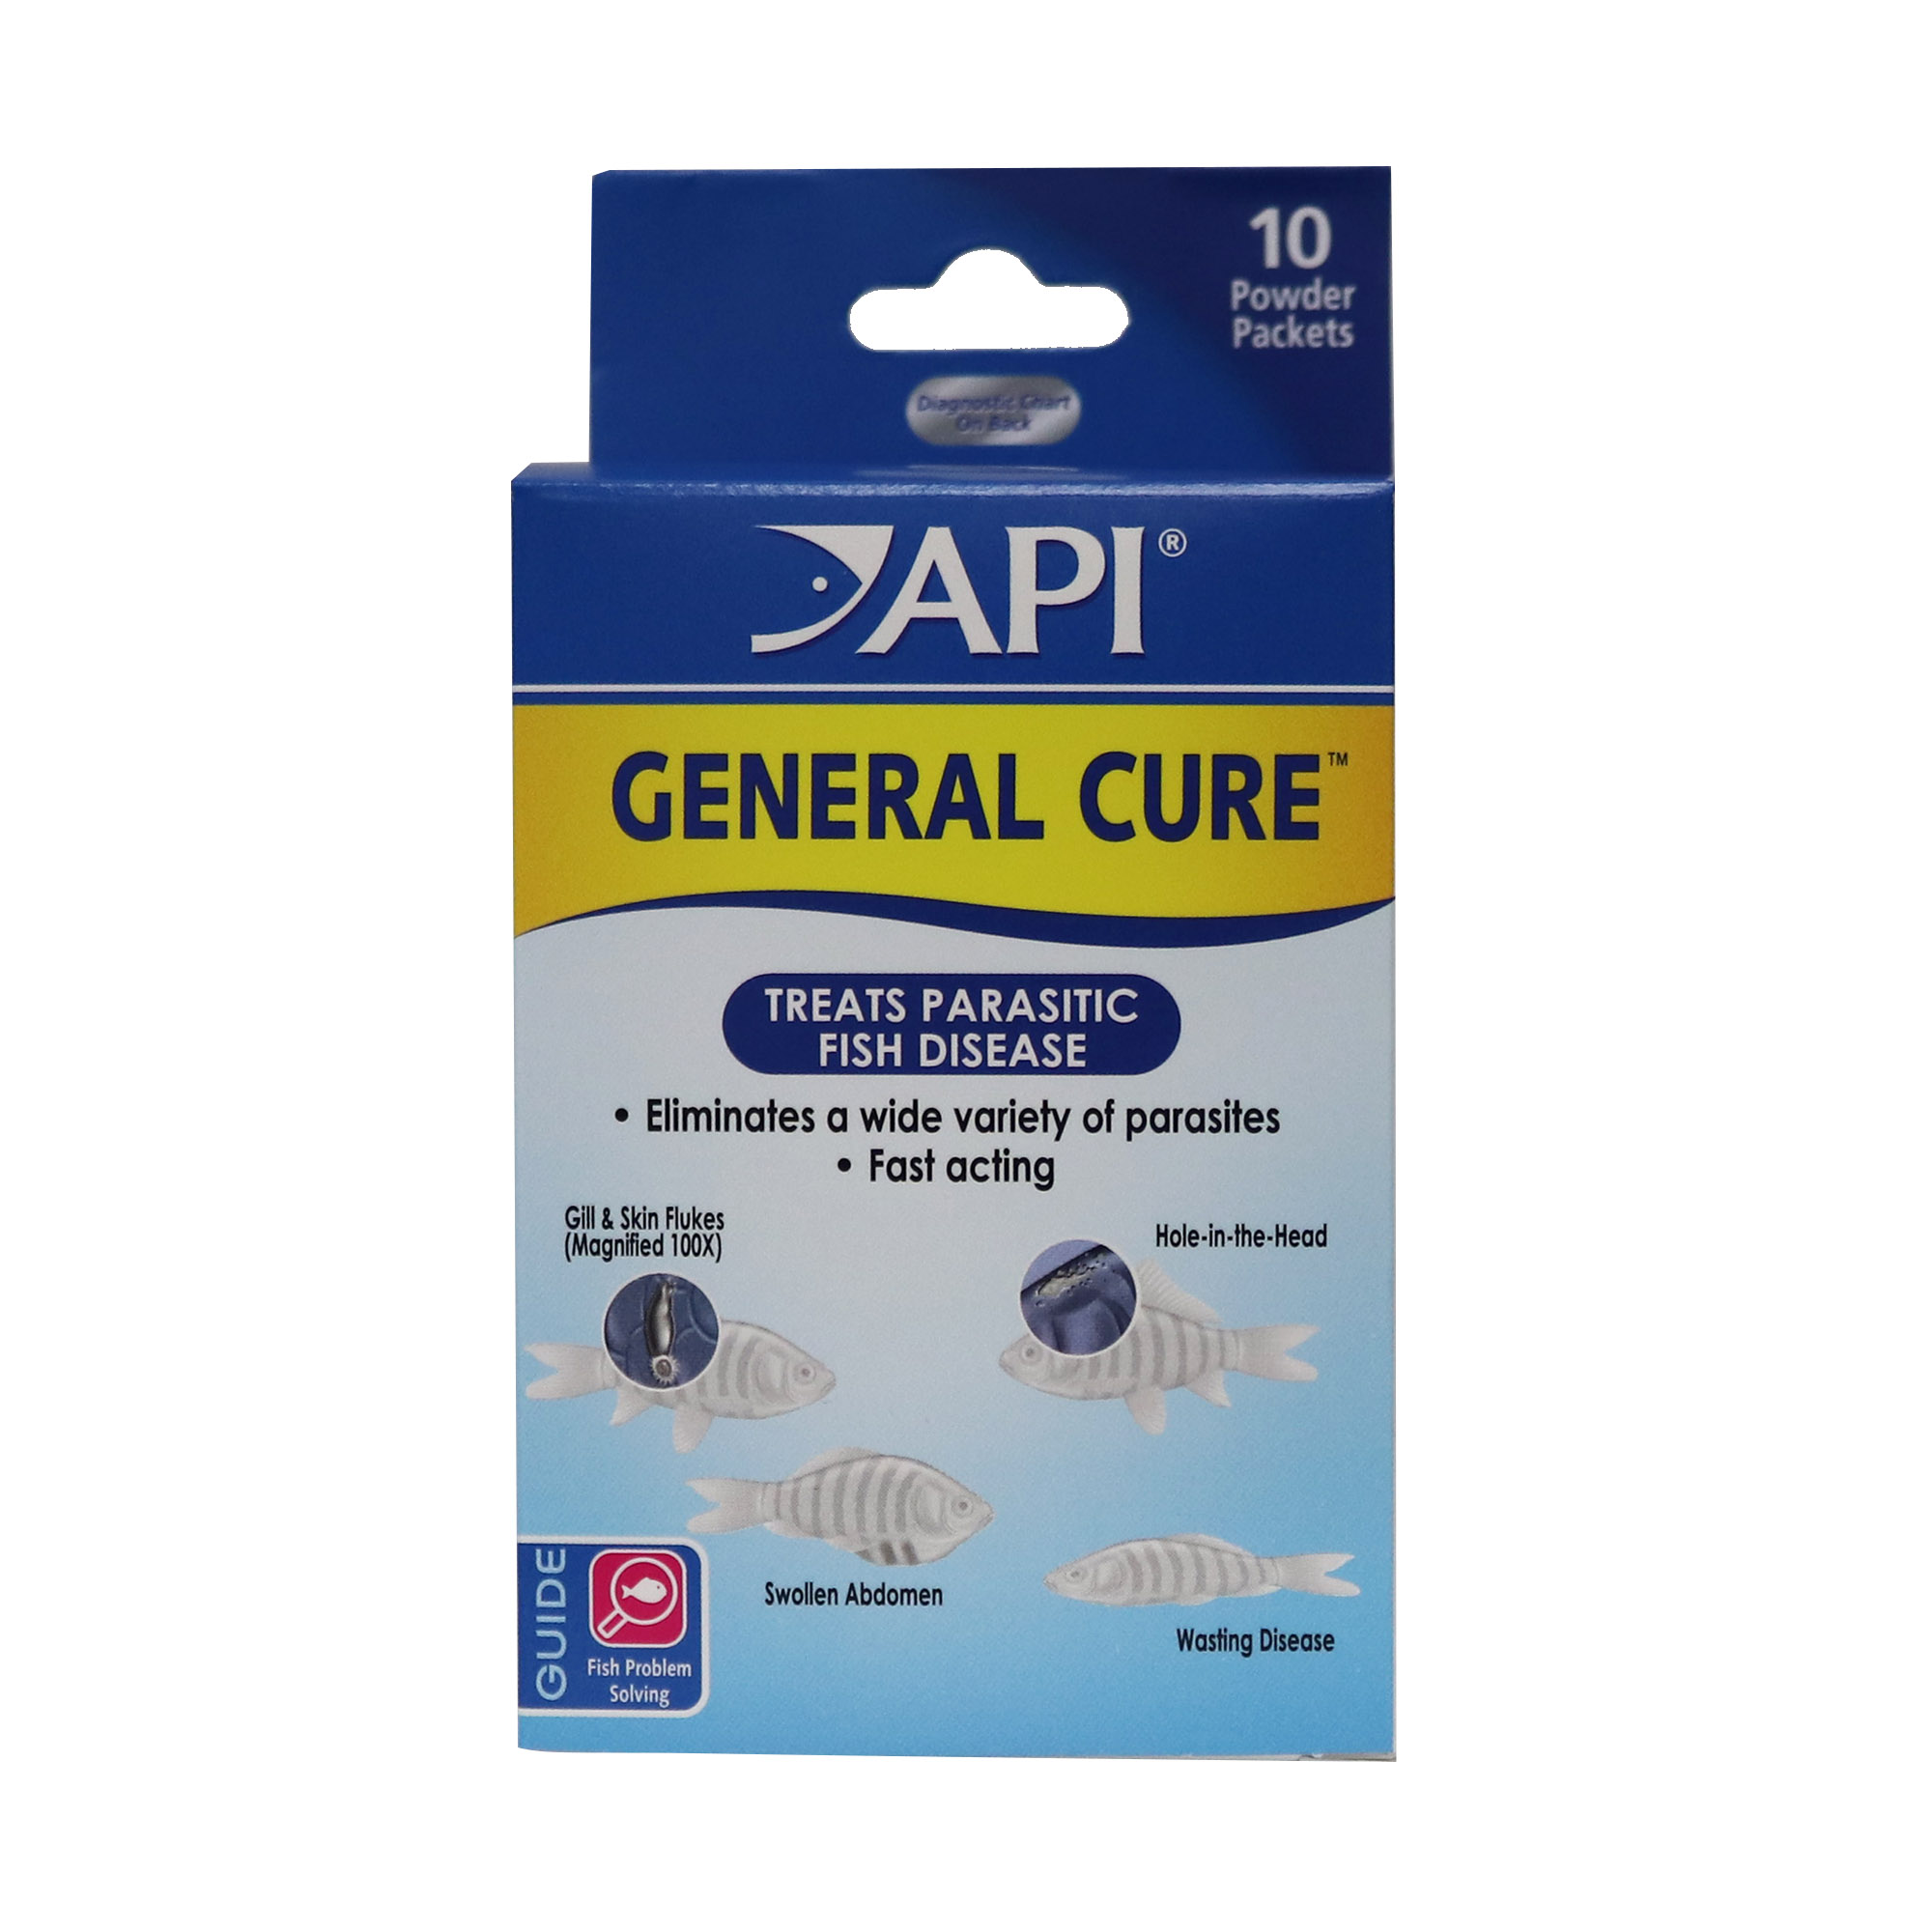 GENERAL CURE™